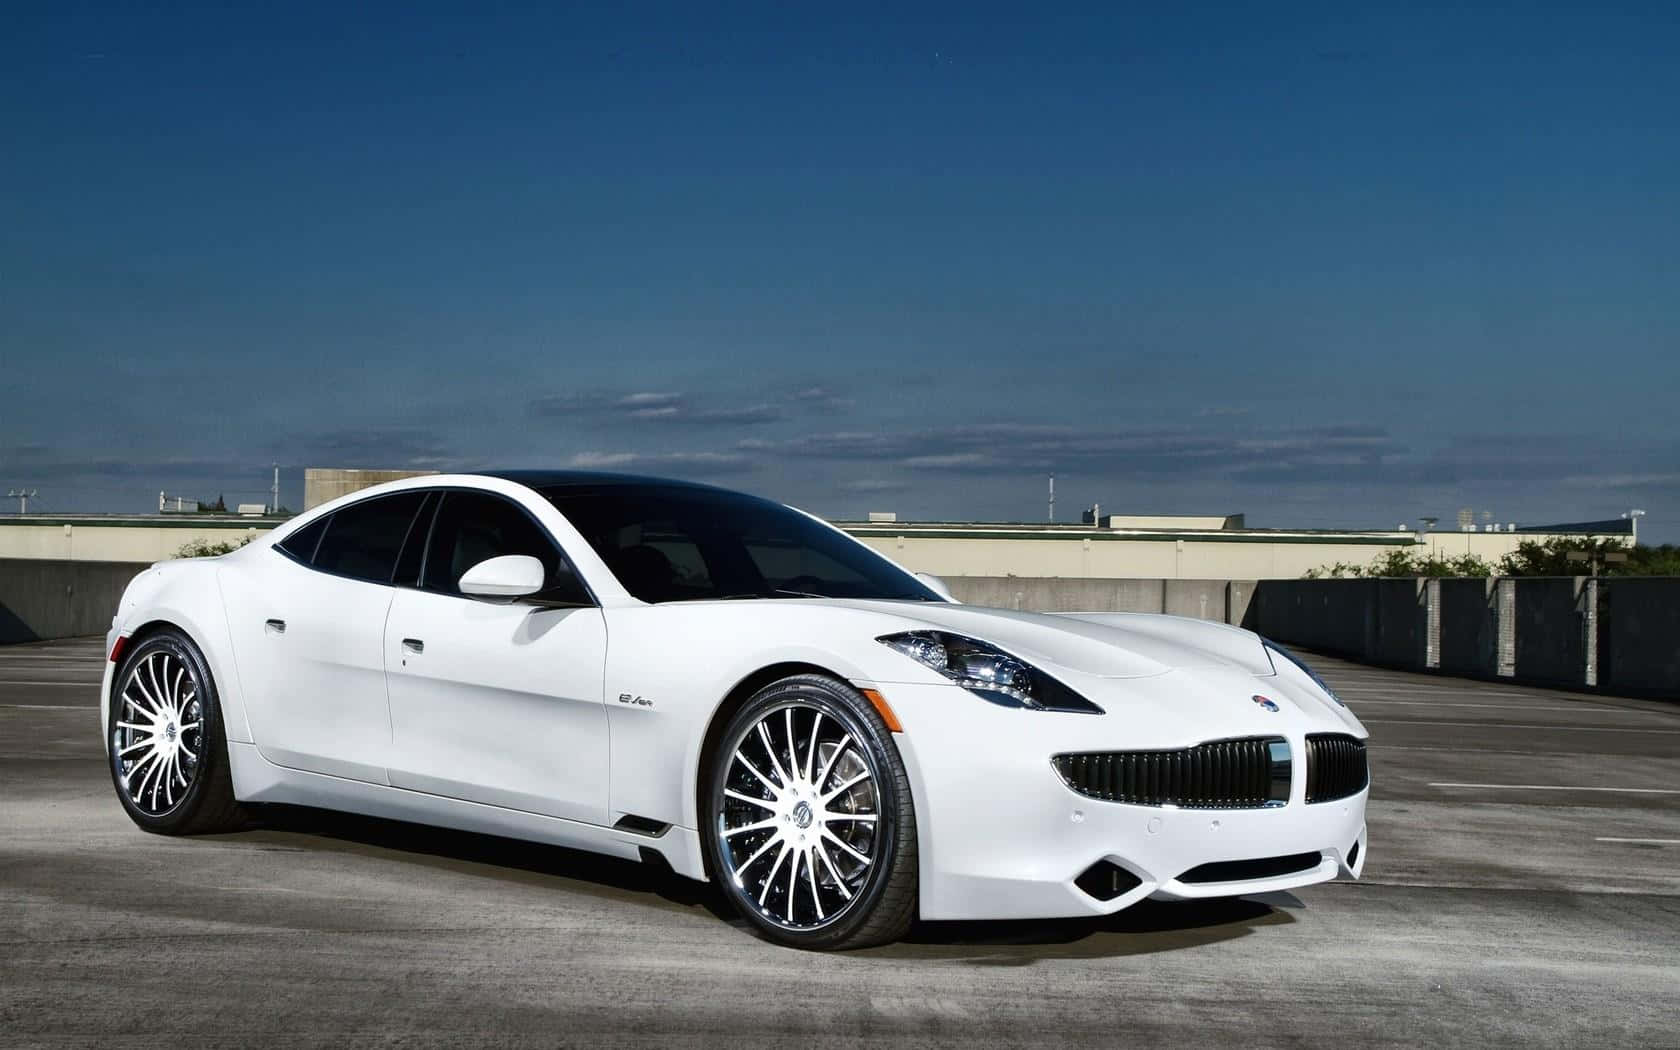 Fisker Karma - Experience Luxury, Efficiency, and Performance in One Wallpaper